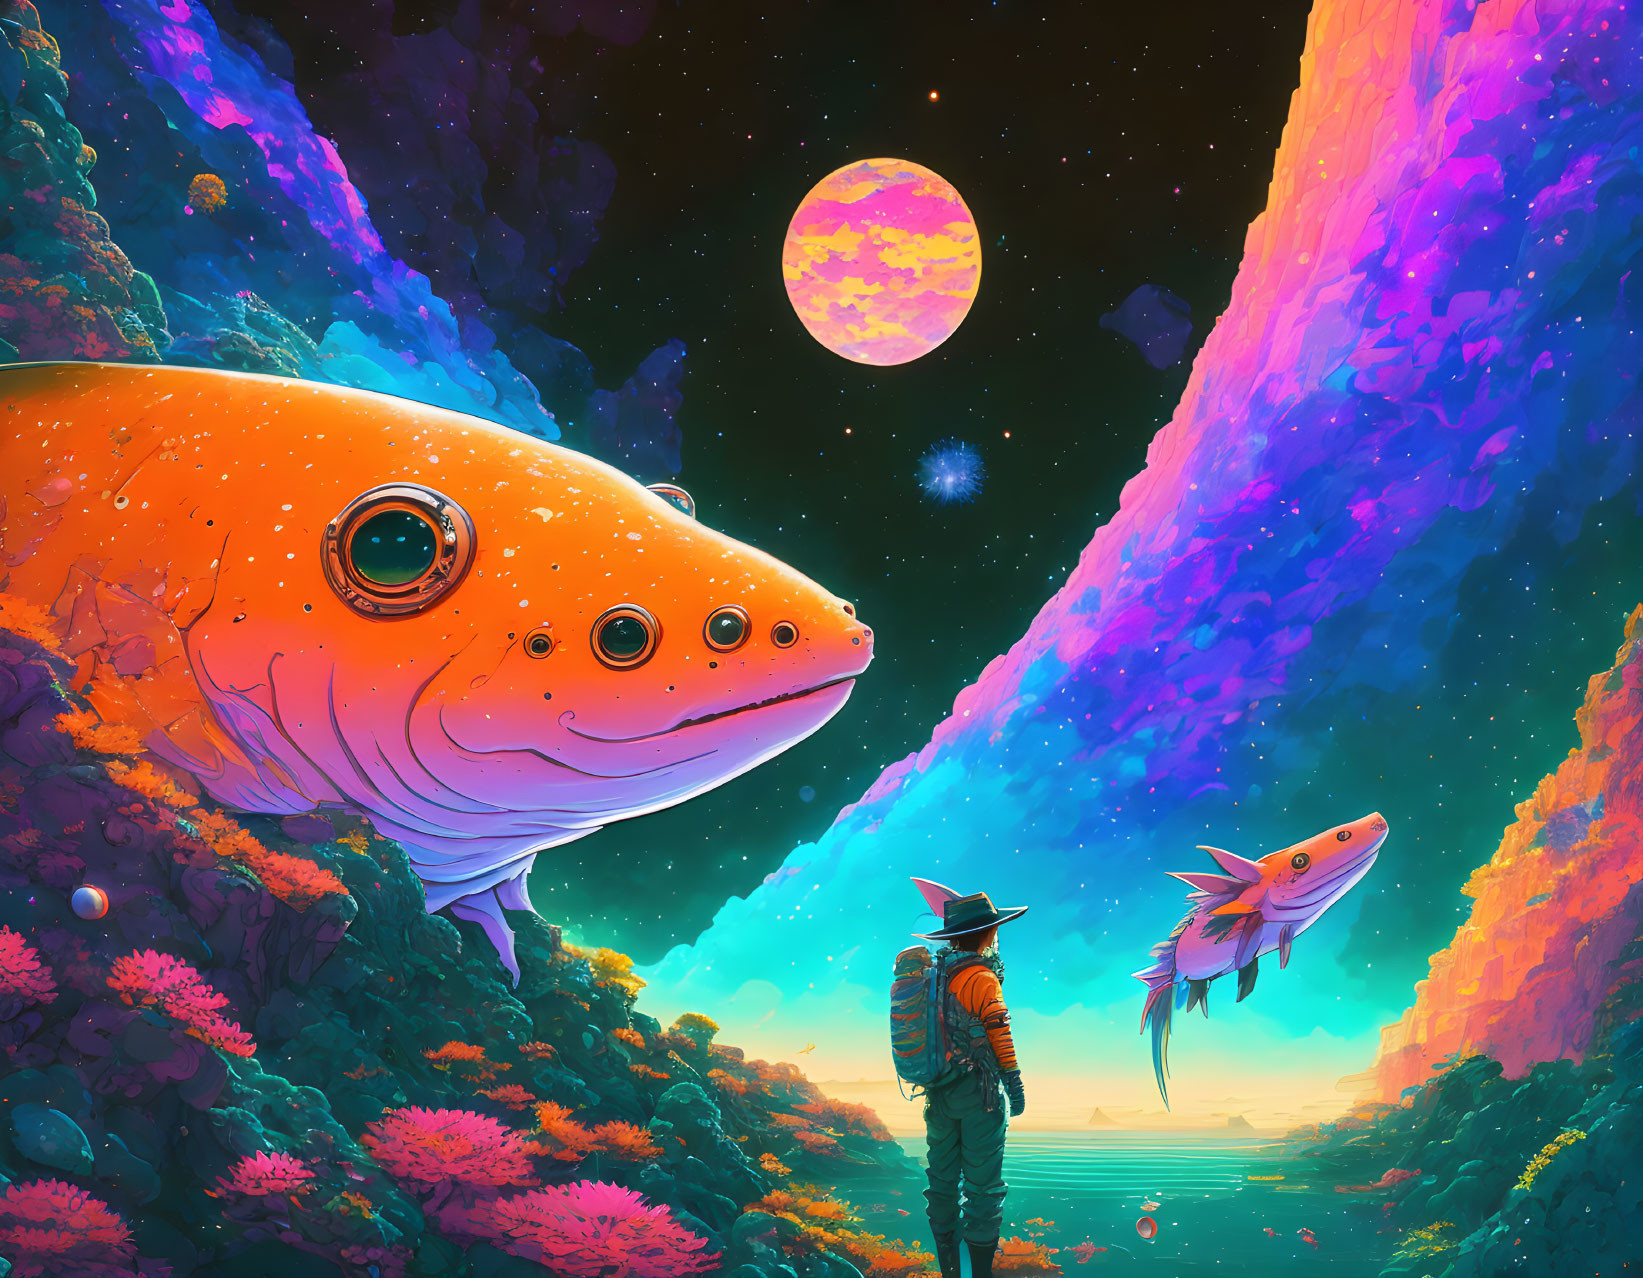 Colorful digital painting of a person in spacesuit on alien planet with floating fish